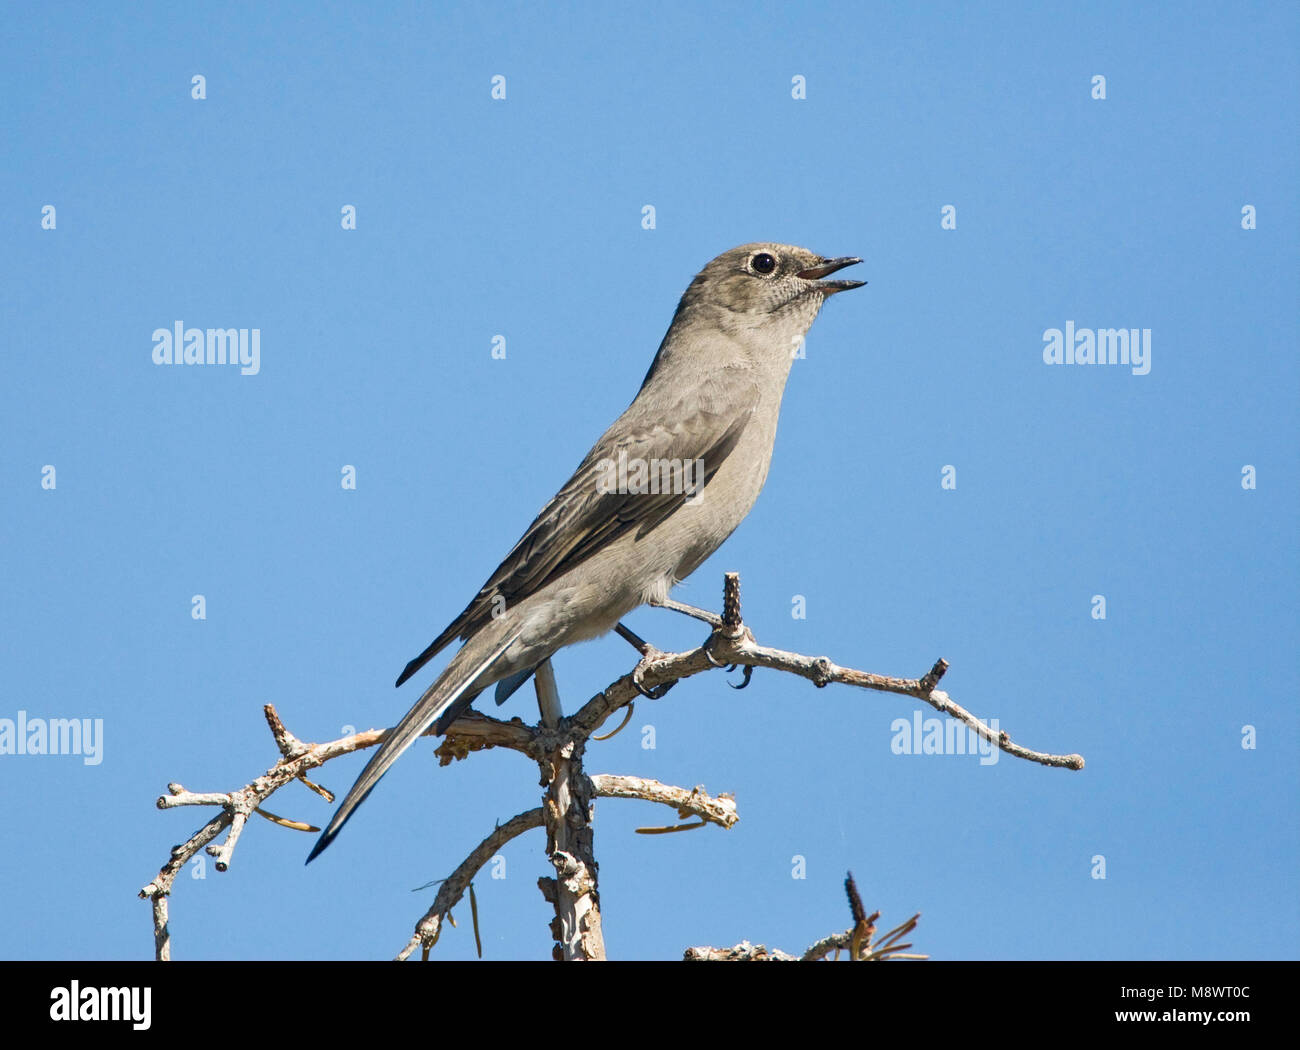 Townsend-solitaire zingend, Townsends solitaire singng Foto Stock